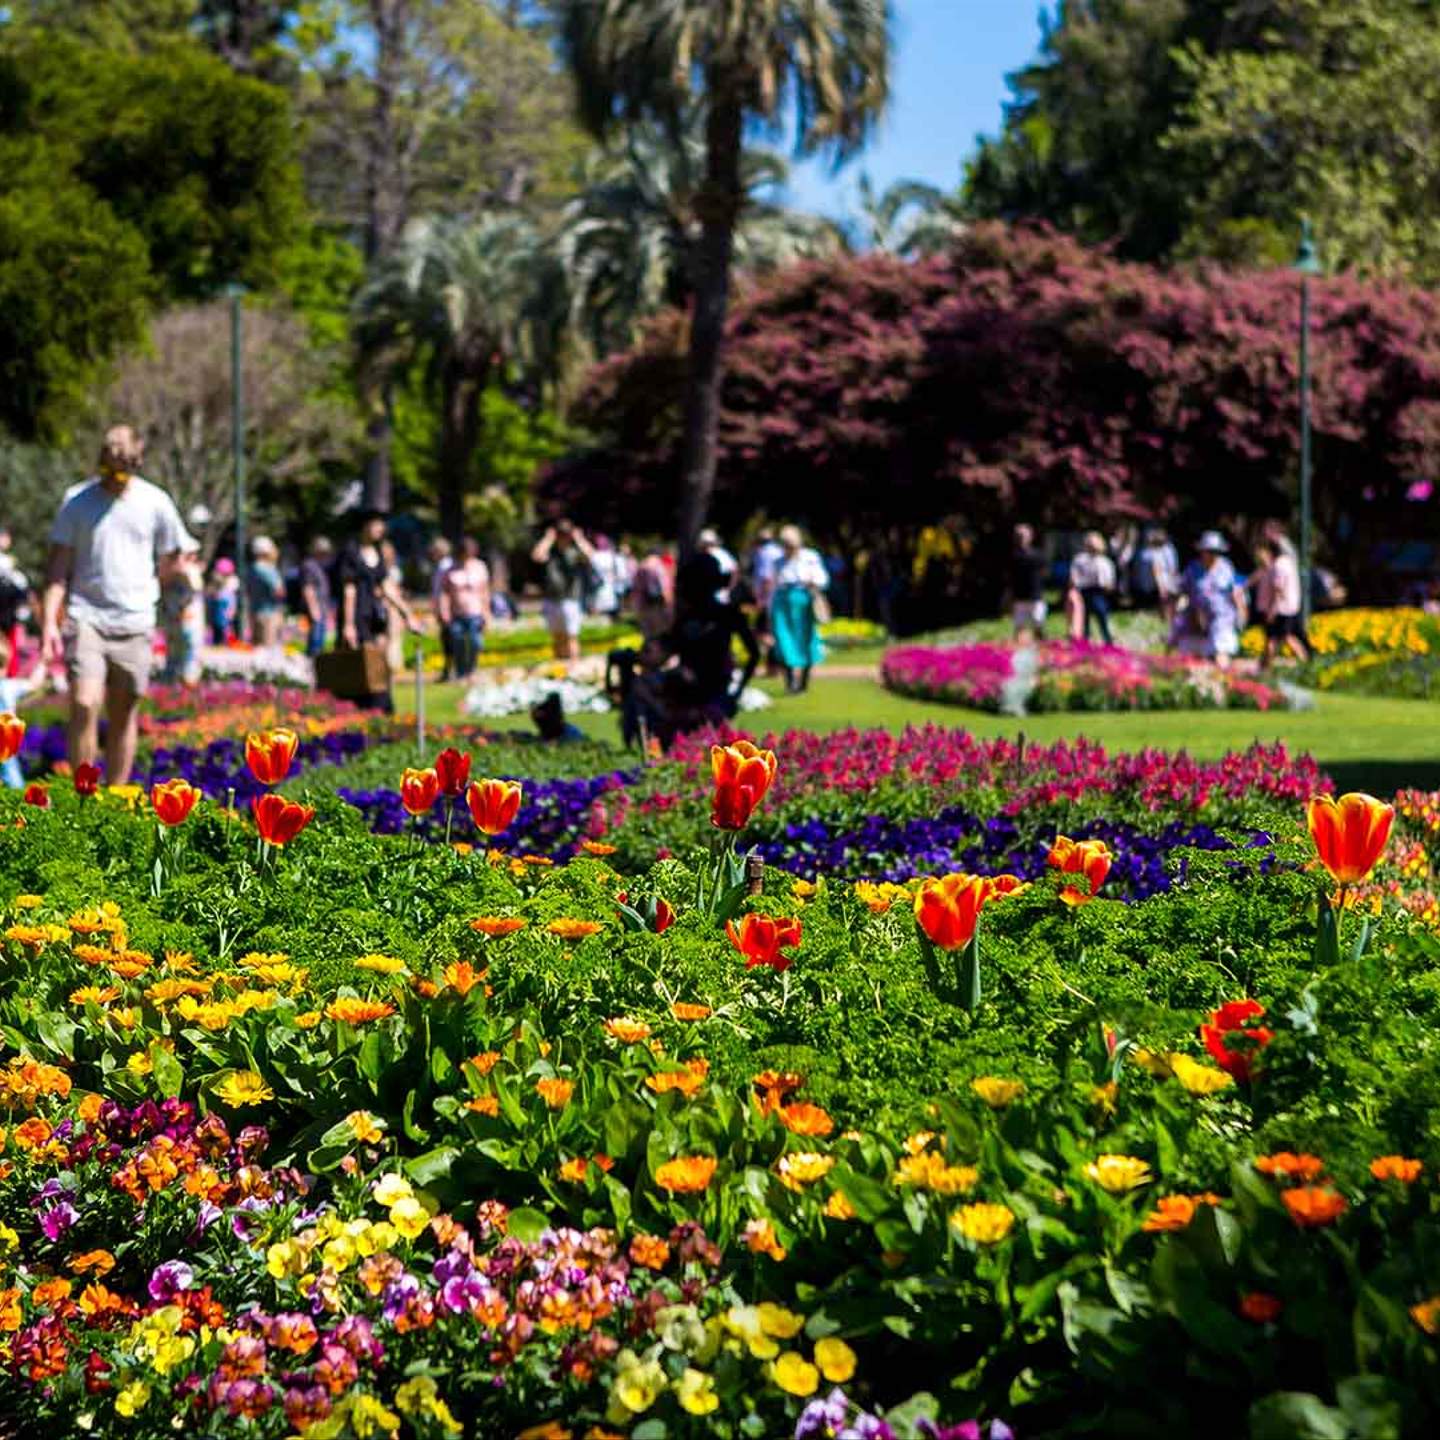 Toowoomba Carnival of Flowers: Everything to Know